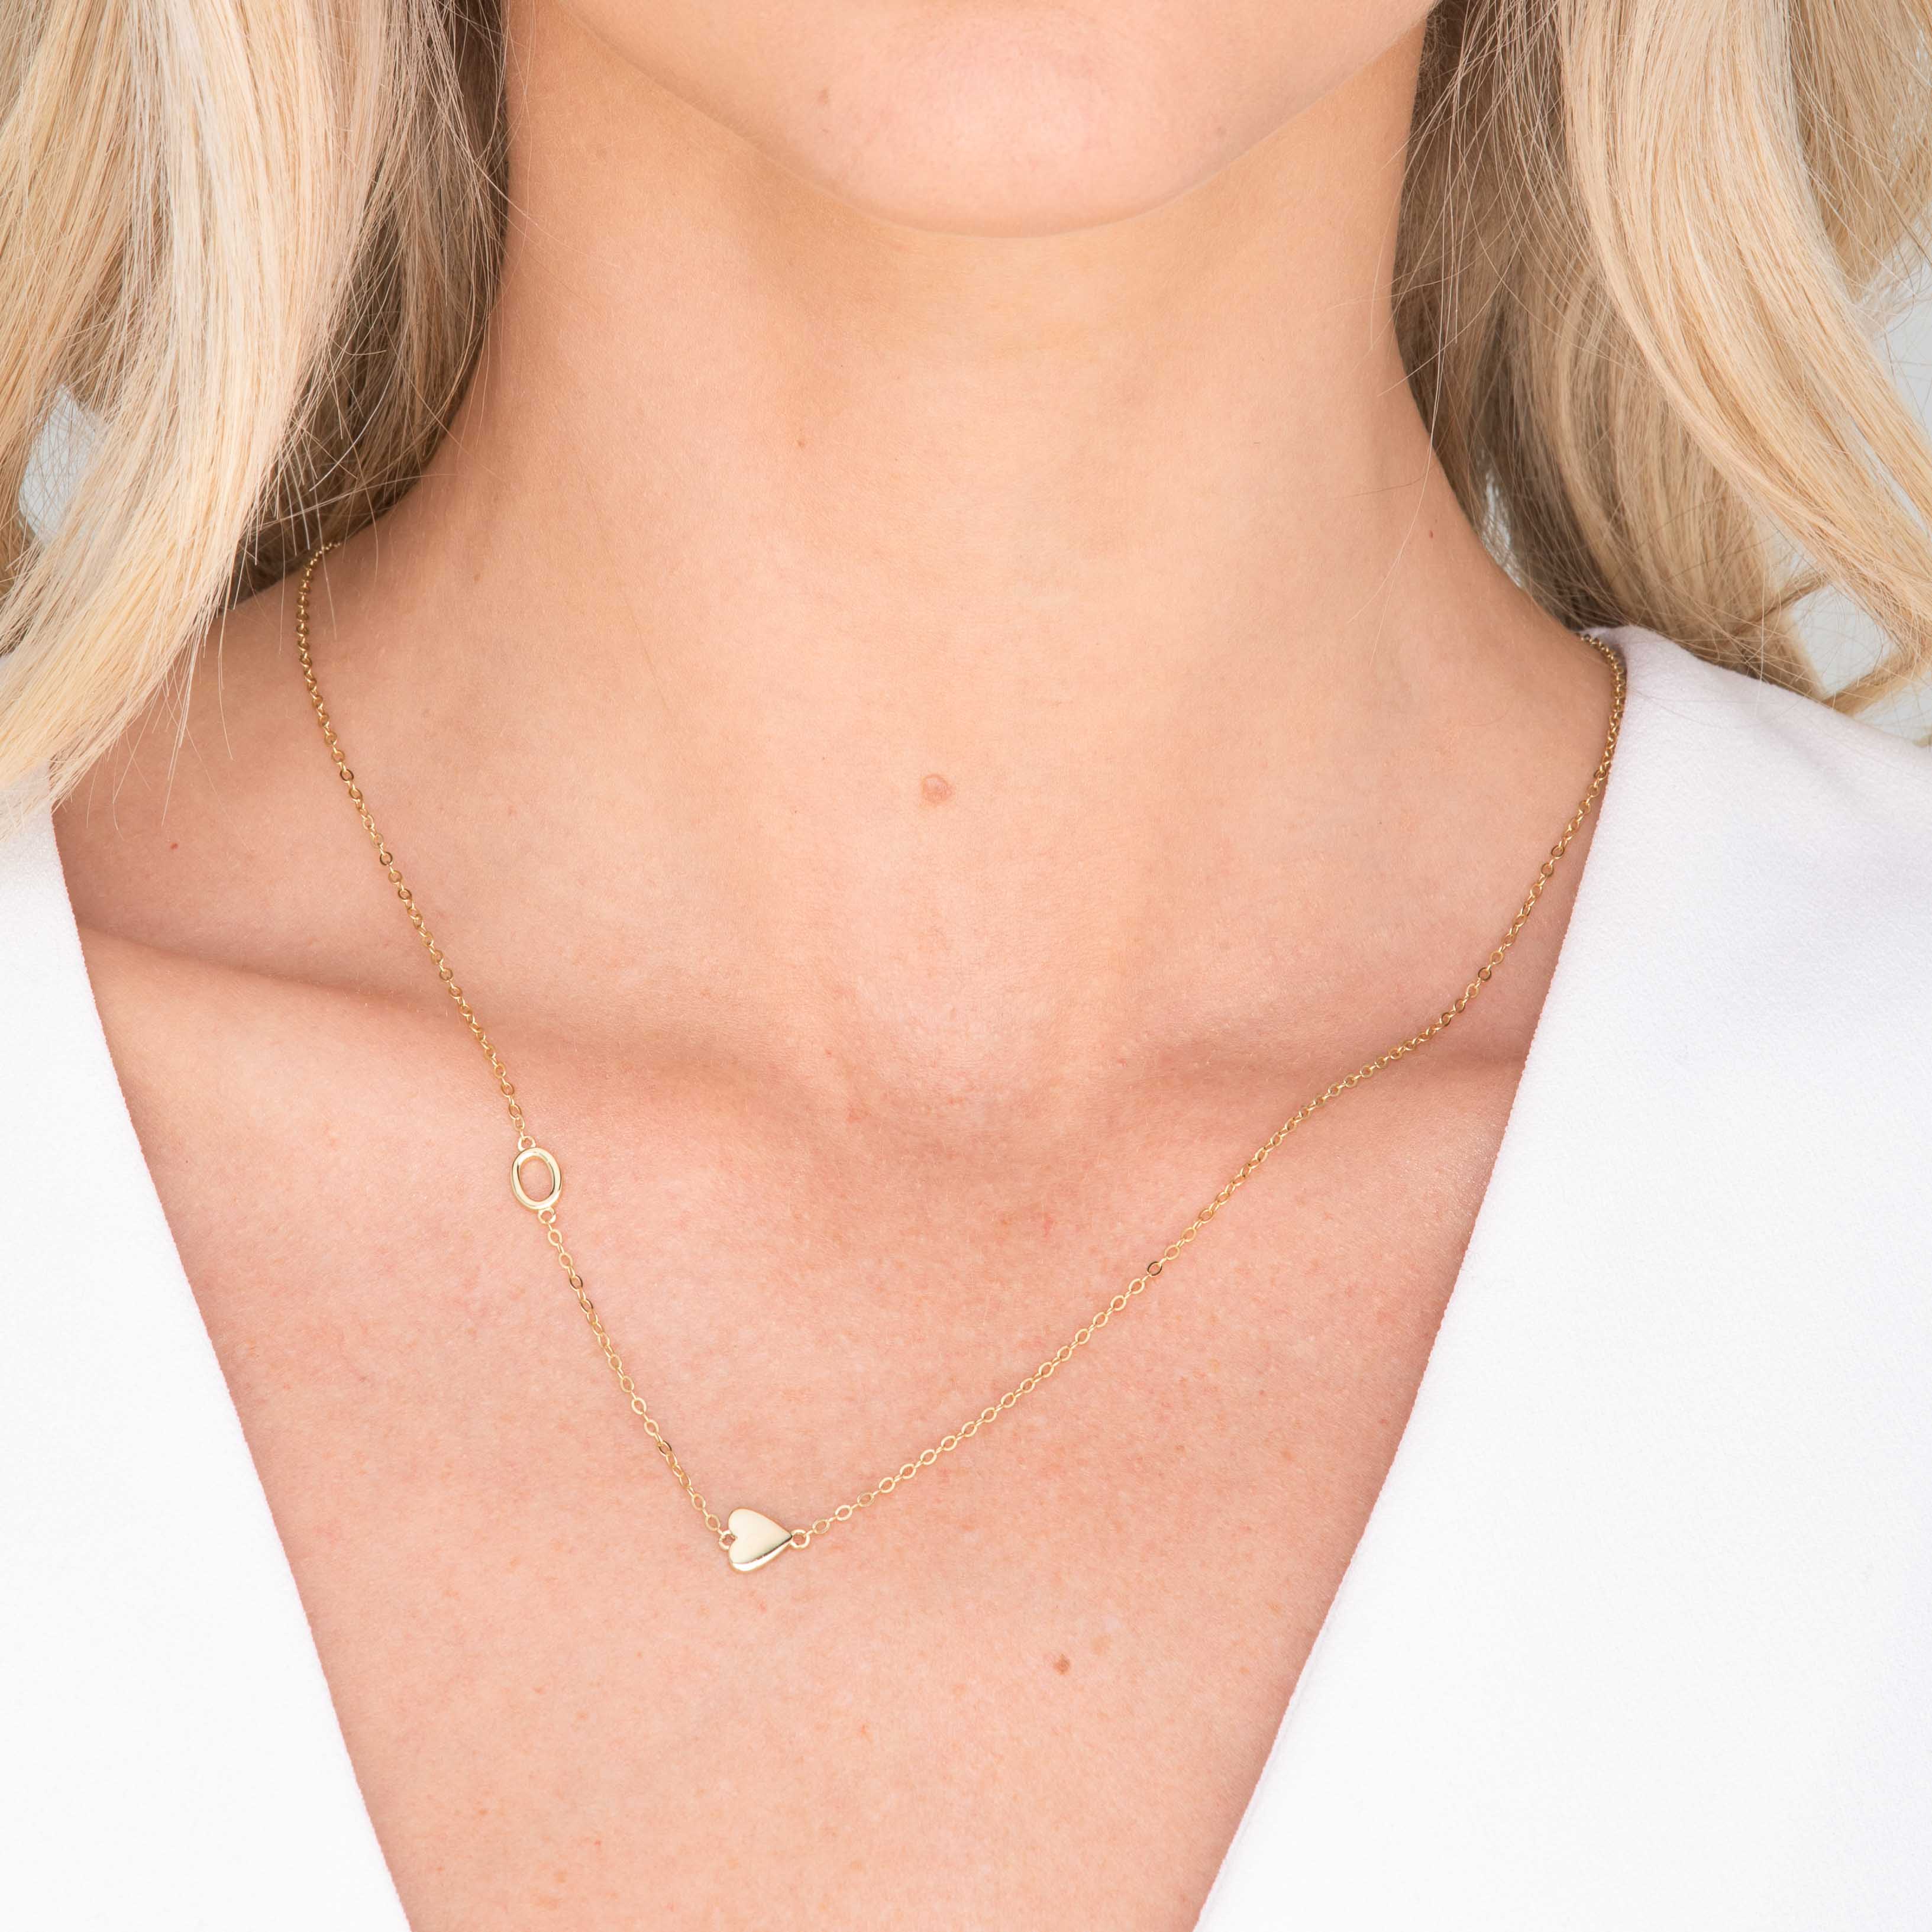 Two Sideways Initial Necklaces in 18k Gold Plating - MYKA